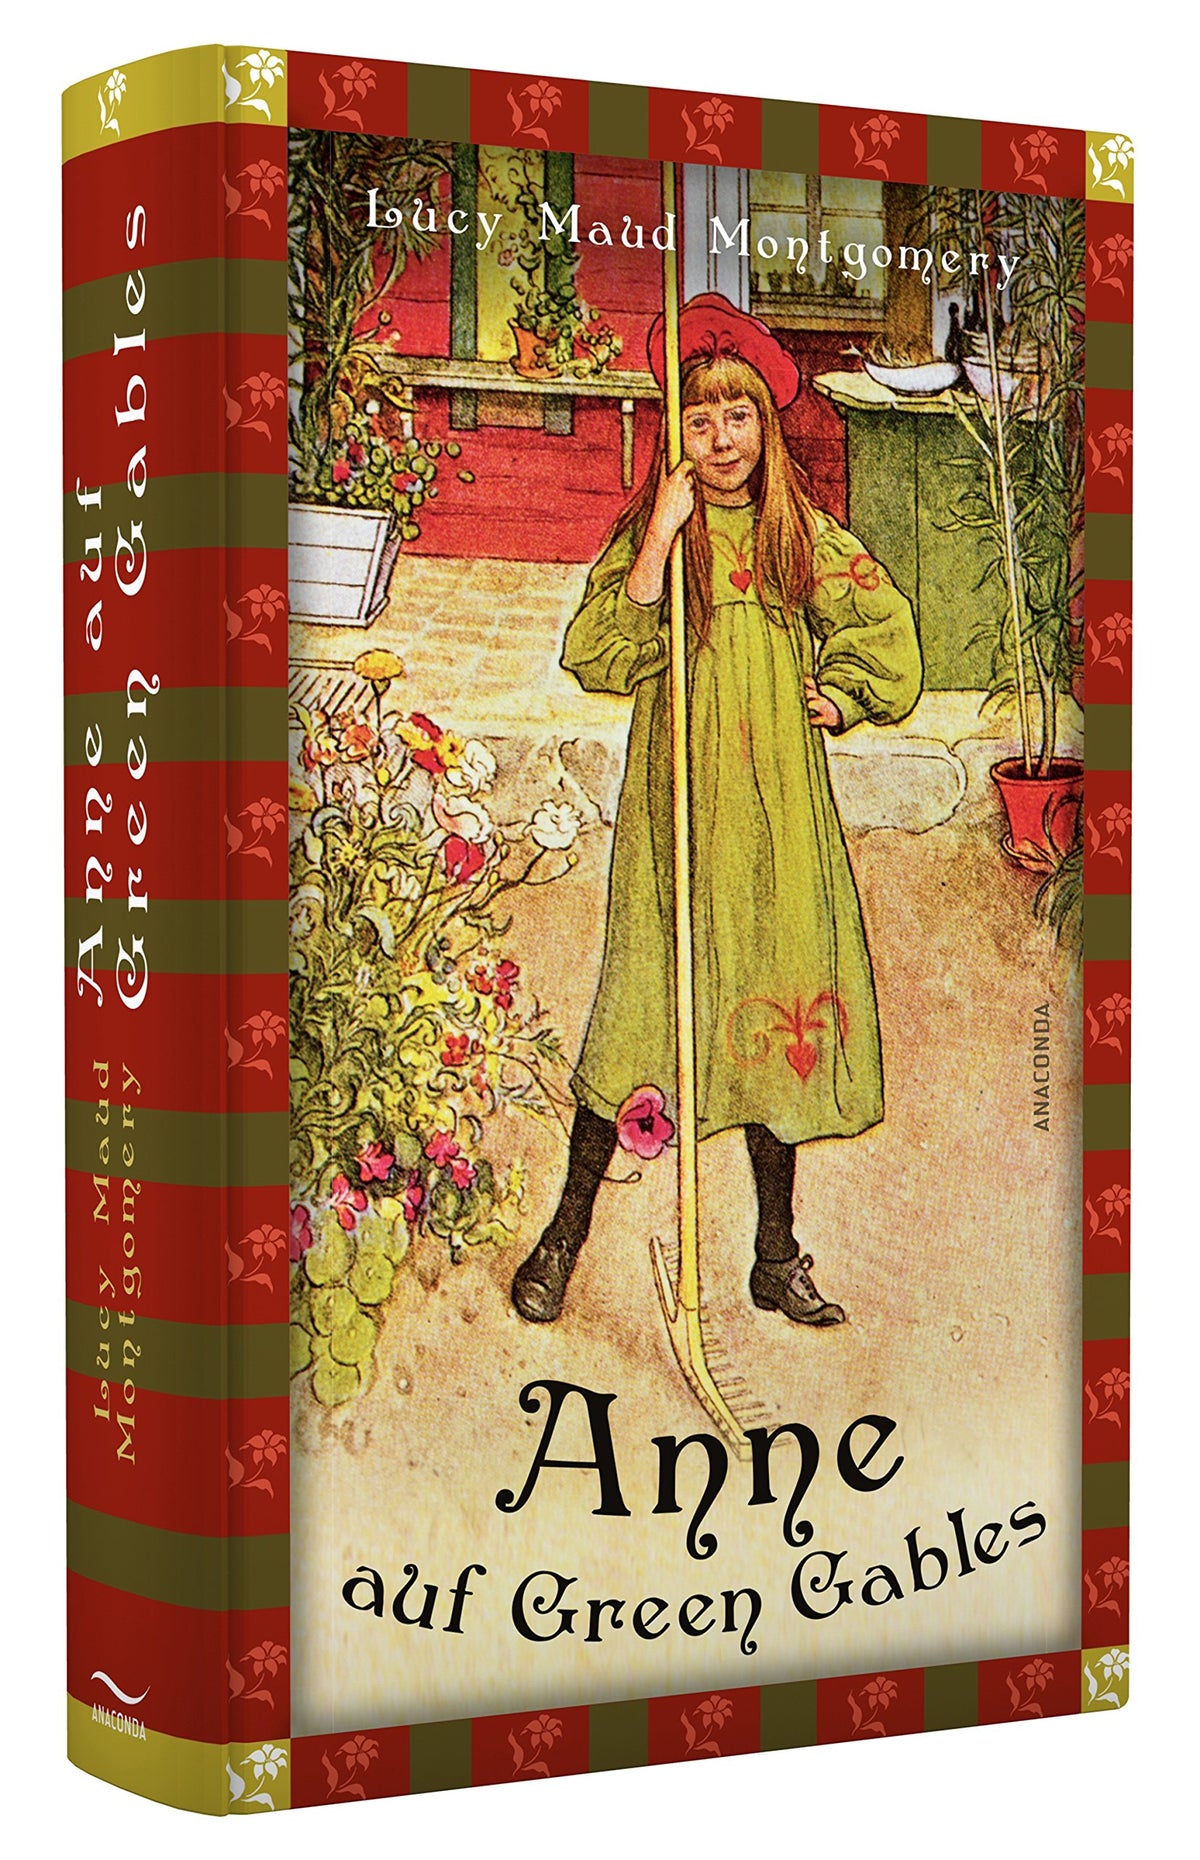 Anne auf Green Gables Book in German Hardcover